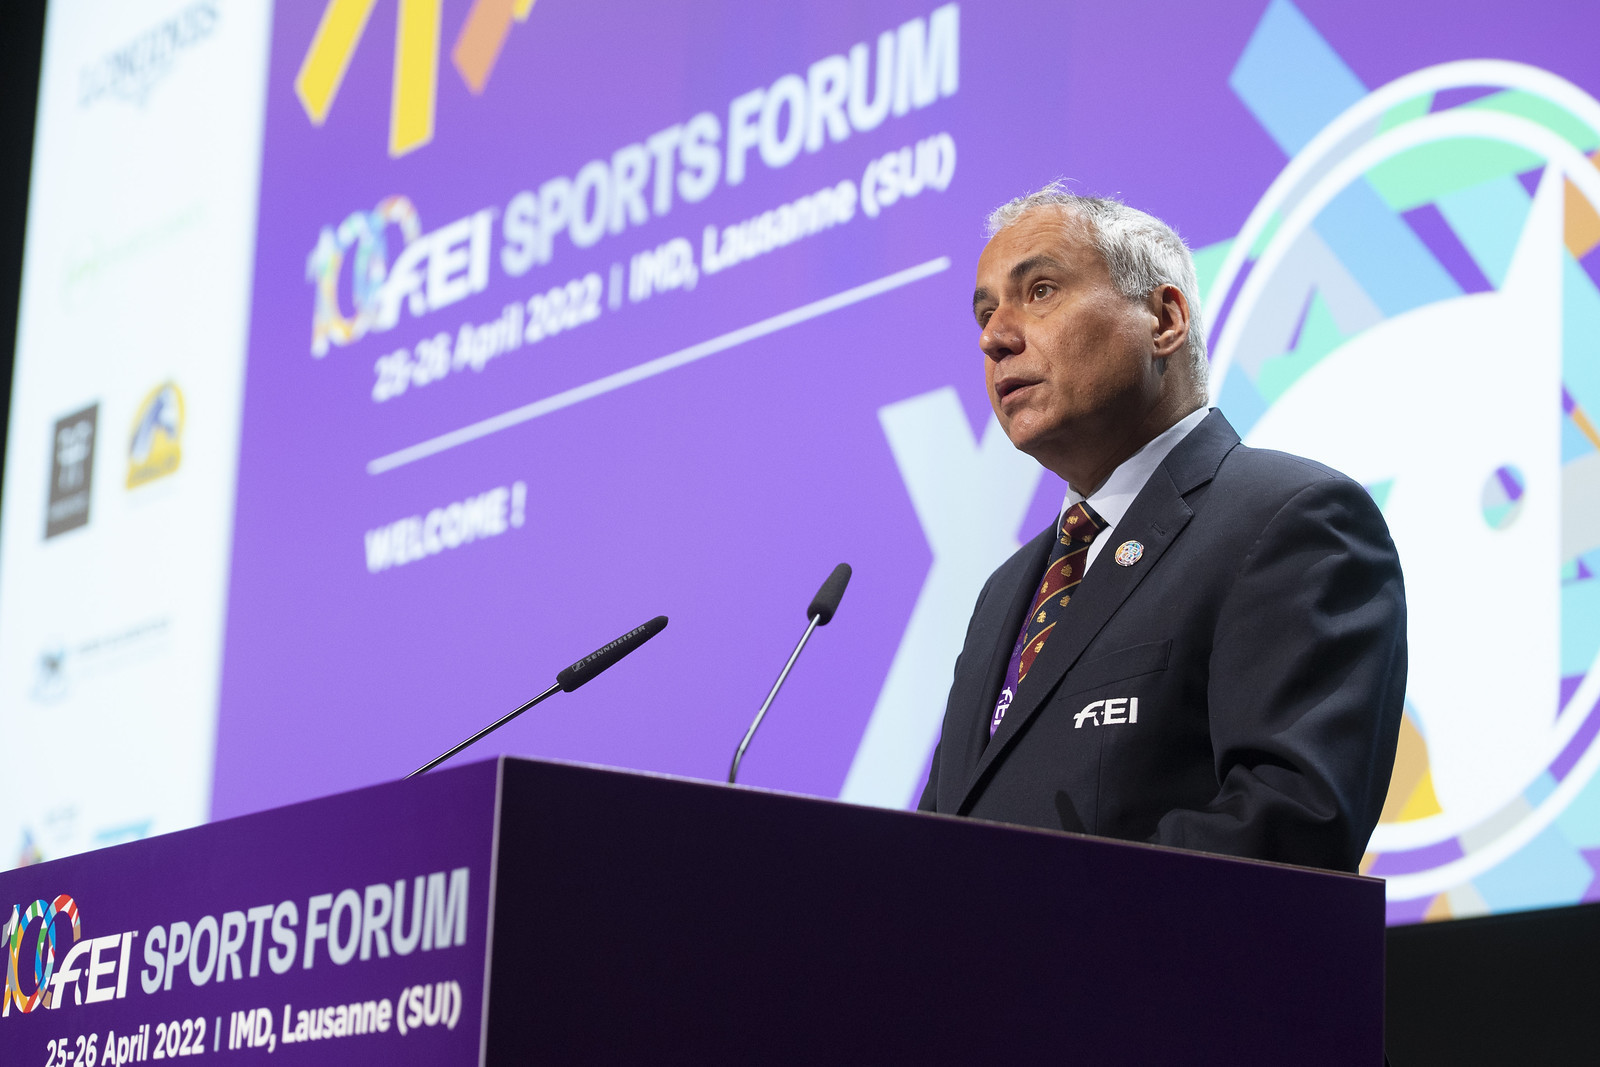 FEI Sports Forum begins with significant changes for horse sport at Paris 2024